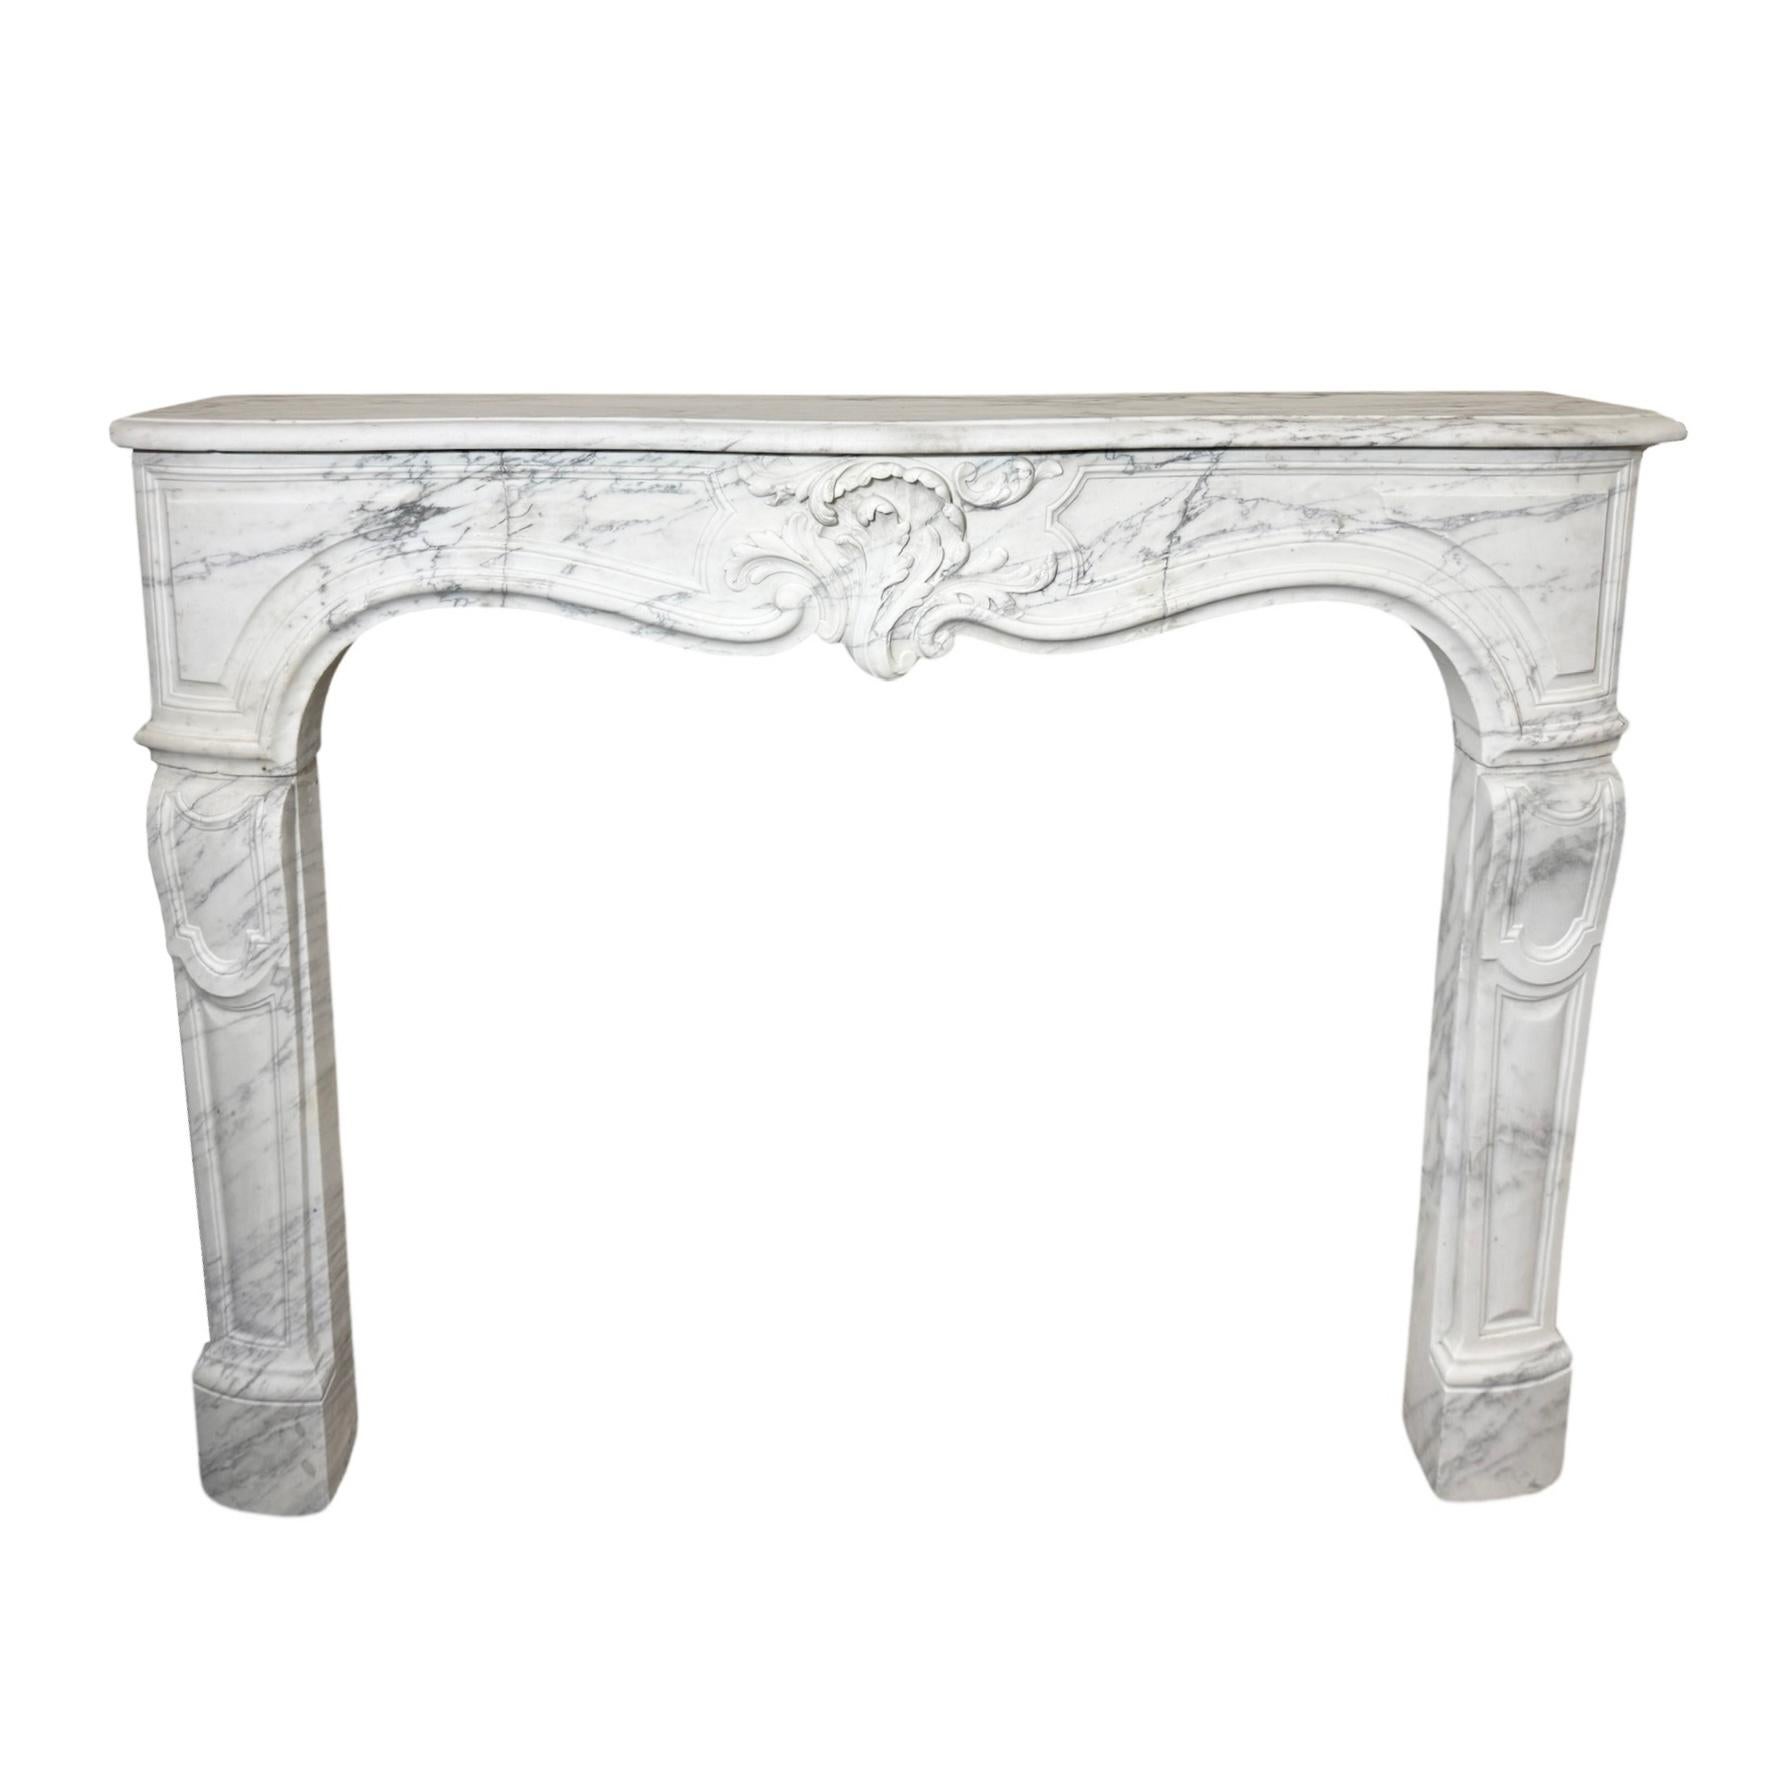 Crafted in France during the 1860s, this exceptional French White Carrara Marble Mantel exudes elegance and sophistication. Made from genuine Carrara marble in the Louis the 15 style, it boasts intricate carvings that add a touch of grandeur to any